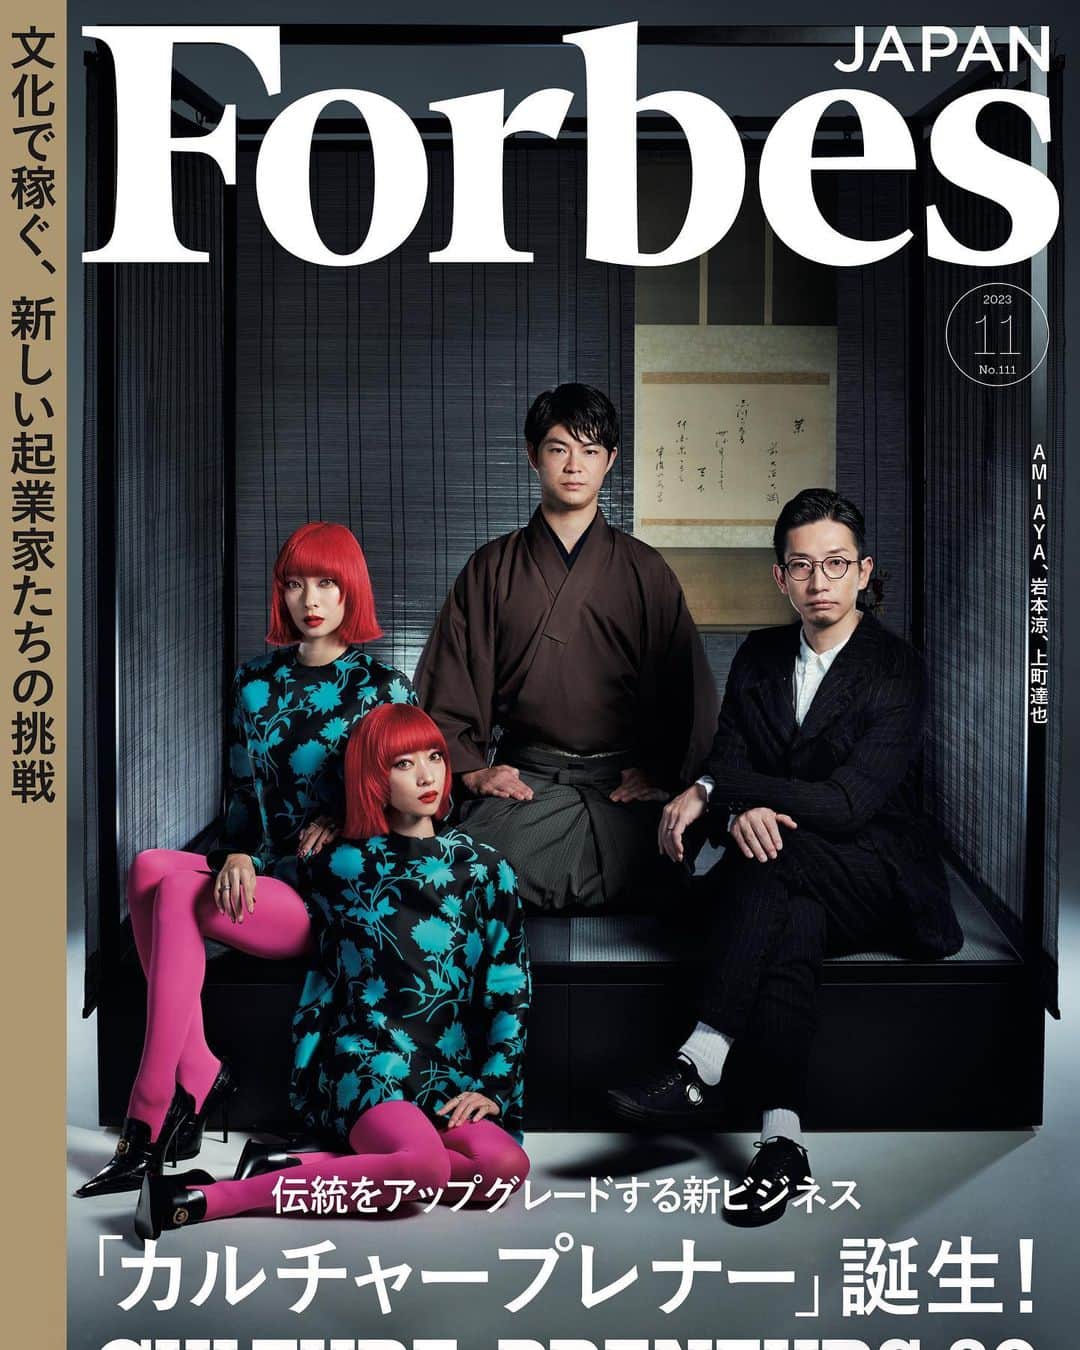 AMIさんのインスタグラム写真 - (AMIInstagram)「Forbes Japan November is released today.   I am so happy to share this news.  We were chosen as Top 30 Culture-Preneurs and was able to part of the cover 🦋 It truly is an honor.  We will continue to do our best to introduce novel frameworks, new possibilities, and expressions that are most like ourselves to contribute to the world of fashion, and to Japan’s culture.  We won’t fear to challenge and trust our possibilities to continue to take our steeps forward.   Forbes Japan November - There are also interviews in the magazine so please check it out   本日発売forbes japan11月号🌹 とっても嬉しい報告が出来て幸せです。 カルチャープレナーの 30組の中に選出して頂き表紙を務めさせて頂きました💎 本当に光栄です。 新しい概念、新しい可能性、私達にしか出来ない表現を確立して常にアップデートしていけるように。  ファッションを通して表現する楽しさや、人生の喜びや日々の彩りを発信し、大好きなファッションの世界に貢献していけるよう、そして日本のカルチャーに少しでも貢献出来るよう精進していきたいと思います。  これからも挑戦することを恐れず 自分達自身の可能性を信じて 1歩1歩進んでいきたいです。  forbes japan11月号 表紙の他に中ページにはインタビューも載っております。 是非ご覧下さい🙇‍♂️✨  photograph by @jan_buus styling by @yoppy0105 hair and make-up by @katohairmake text by @kumima007」9月26日 0時23分 - amixxamiaya